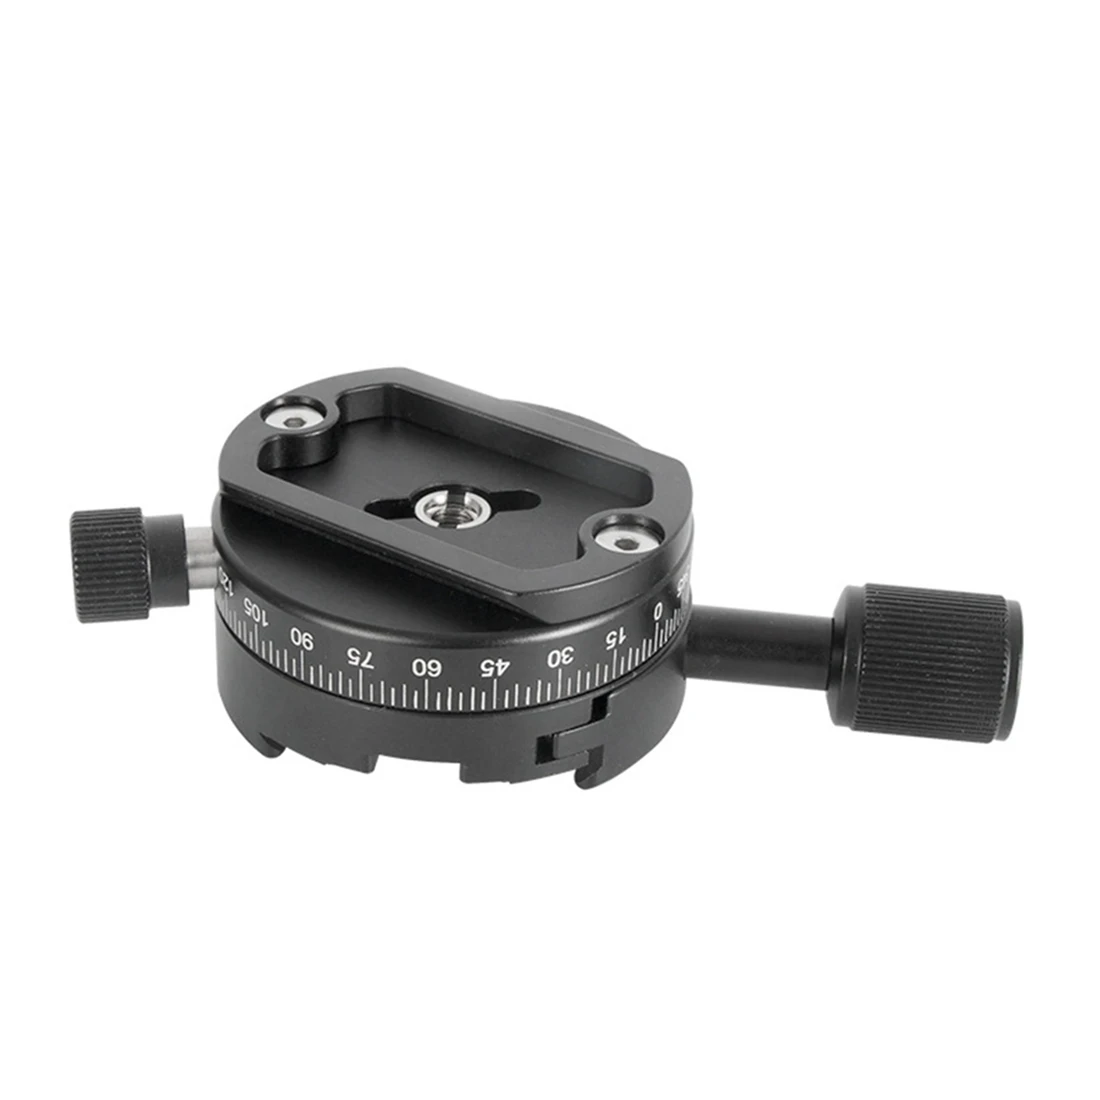 

Camera Clamp Panoramic Clamp Tripod Monopod Quick Release Plate Mount Rotate Clamp for Arca Plate Dslr(QJ01-A)